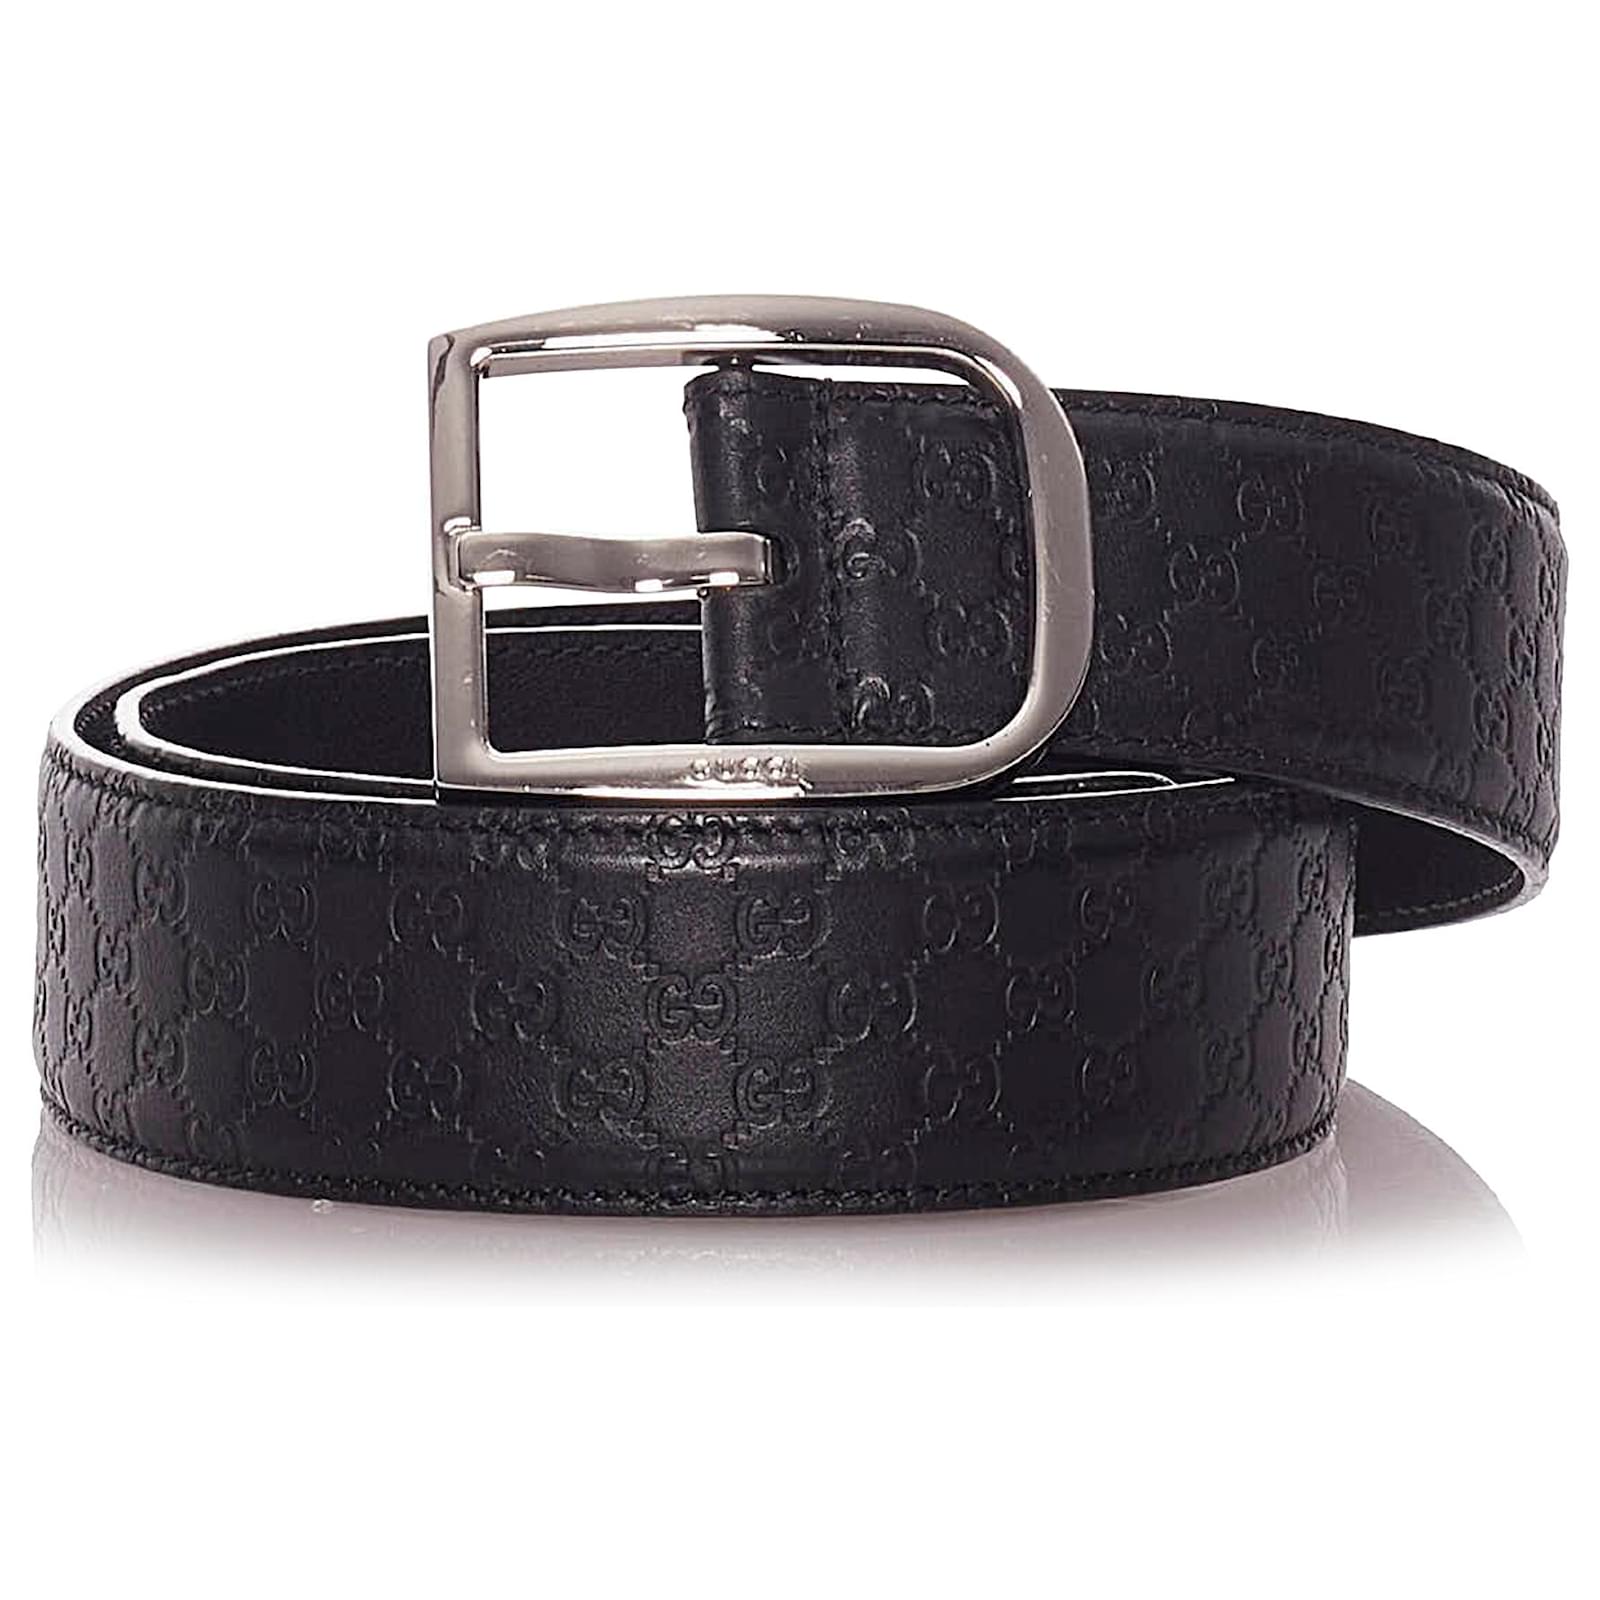 Gucci Black Guccissima Belt Silvery Leather Metal Pony-style calfskin ...